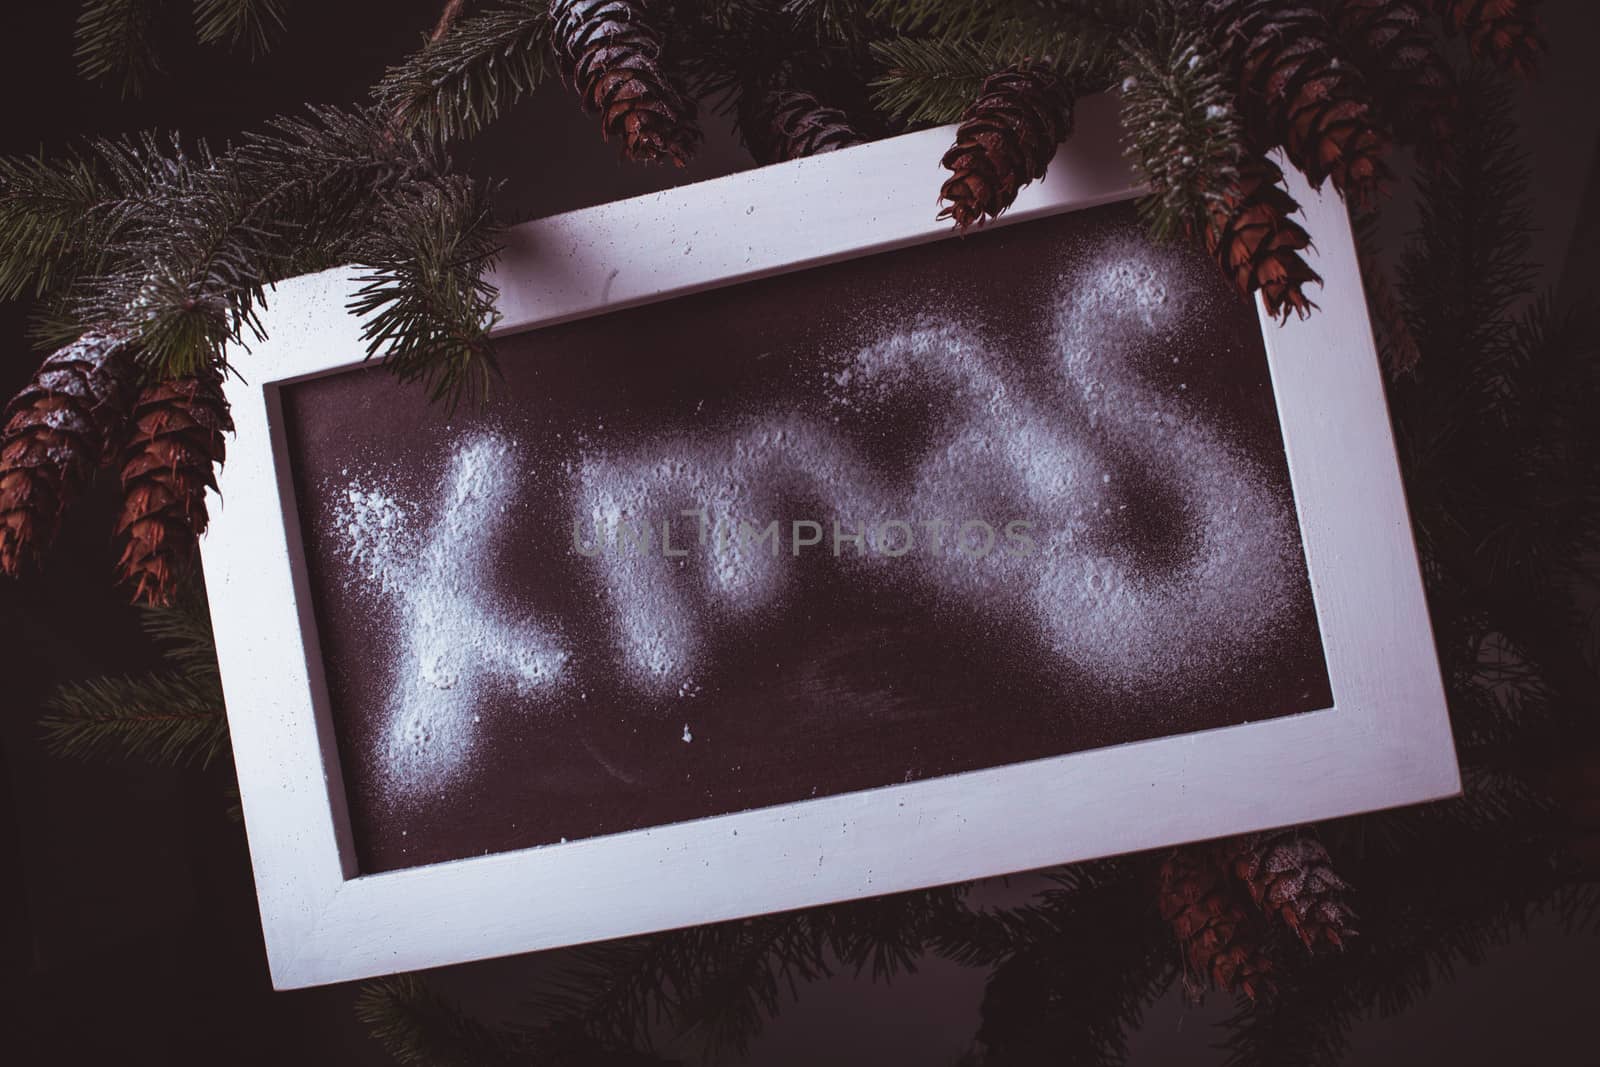 Chalkboard on the pine with "Xmas" word